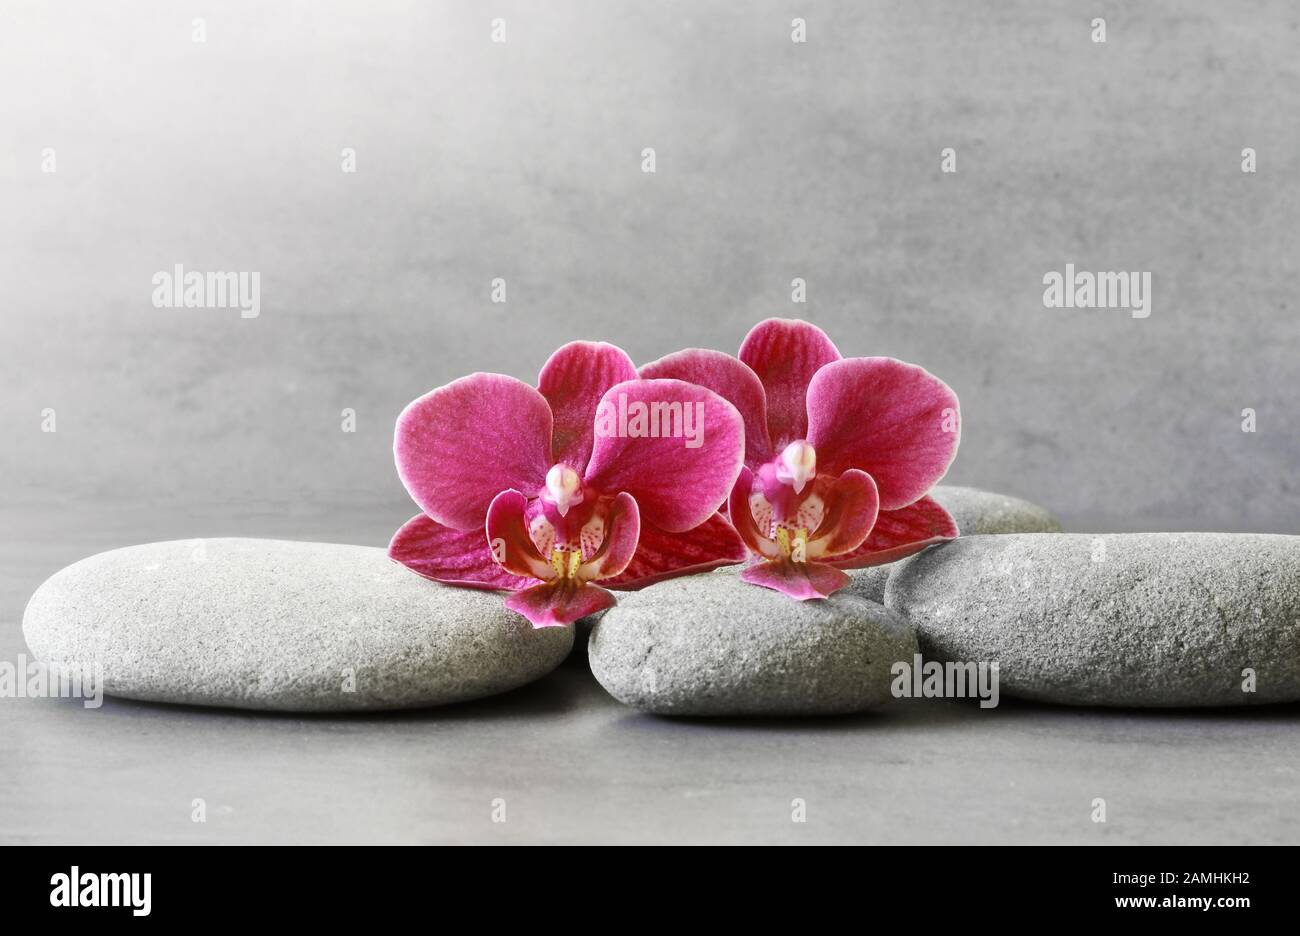 Spa stones and orchid flower on the grey background. Stock Photo